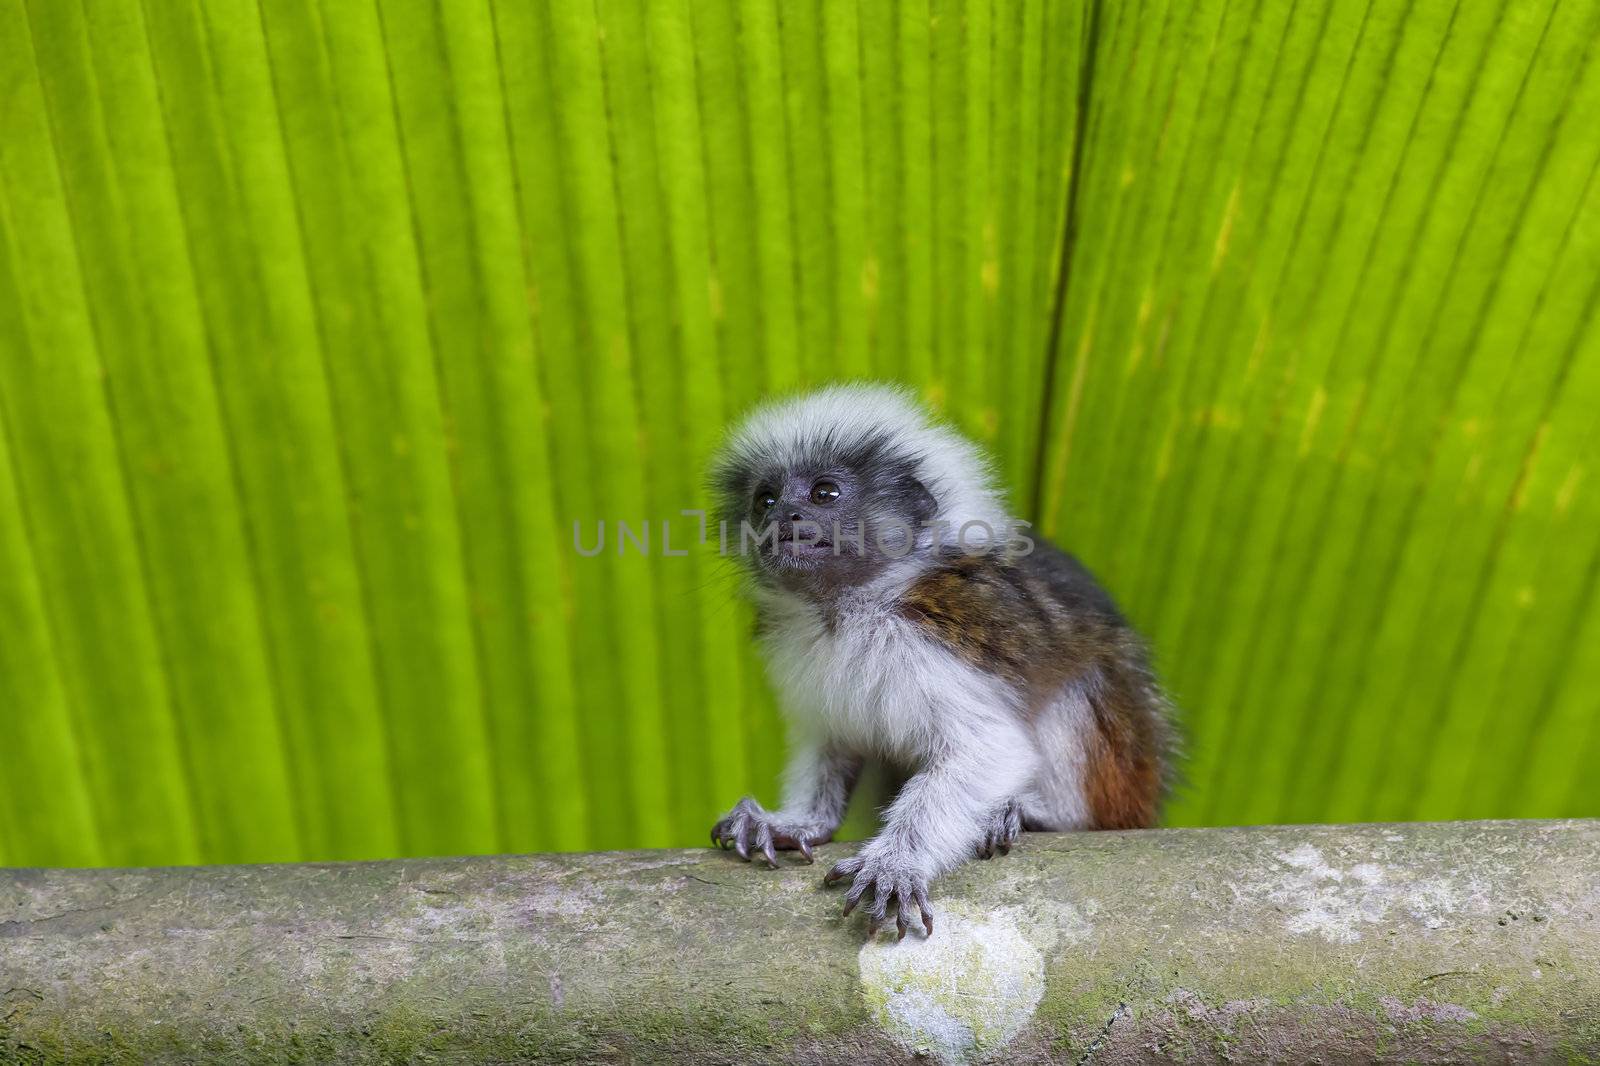 Cotton-top tamarin in the tropical forest of Colombia